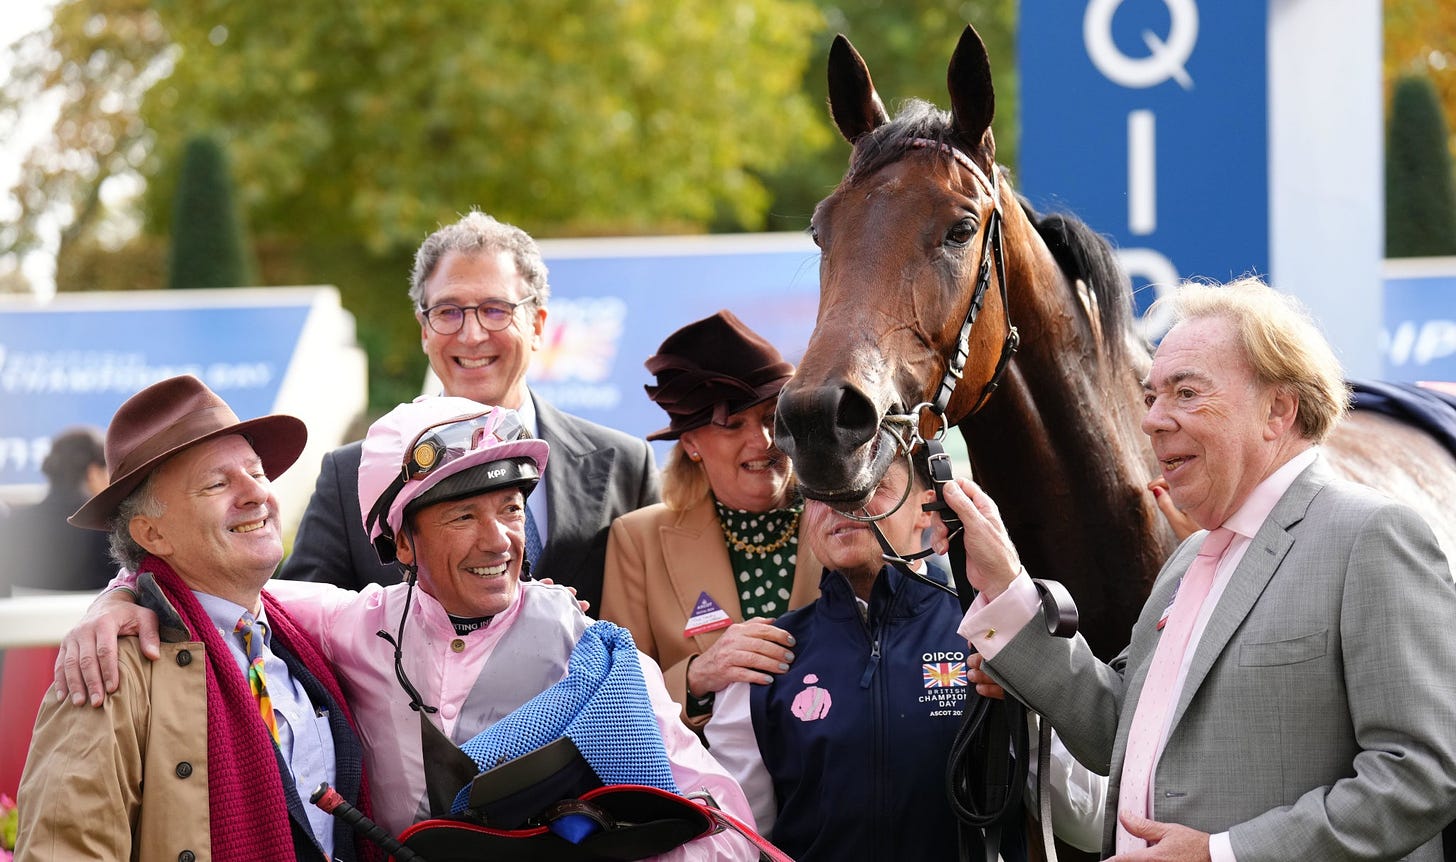 Frankie Dettori celebrates winning the Qipco British Champions Fillies & Mares Stakes on Emily Upjohn with connections and owner Andrew Lloyd Webber (right) during the QIPCO British Champions Day at Ascot Racecourse, Berkshire. Picture date: Saturday October 15, 2022.